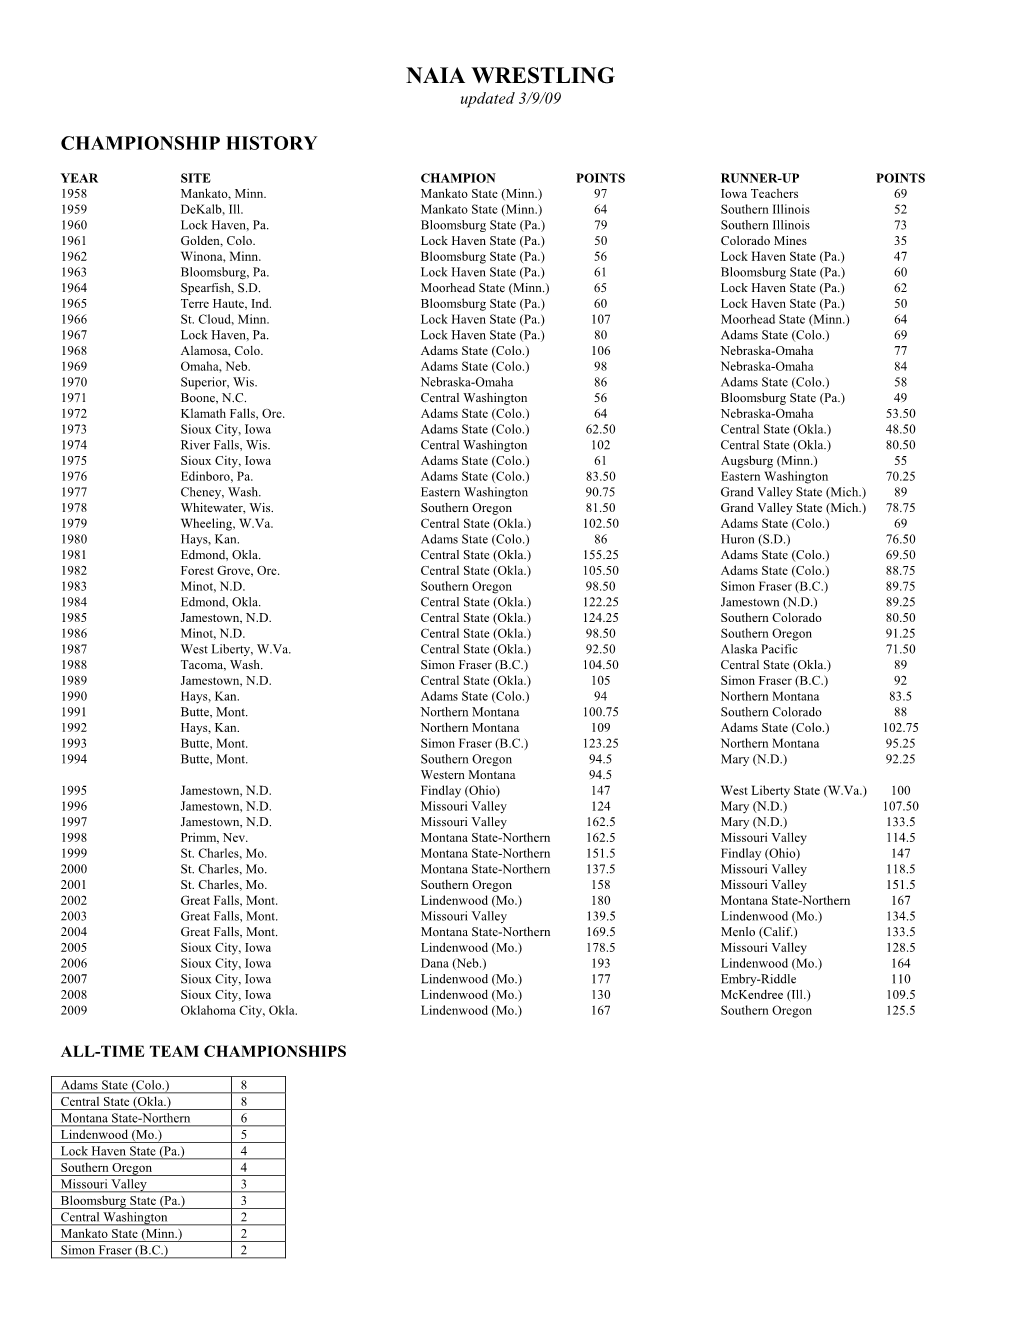 Wrestling Championship History and Records